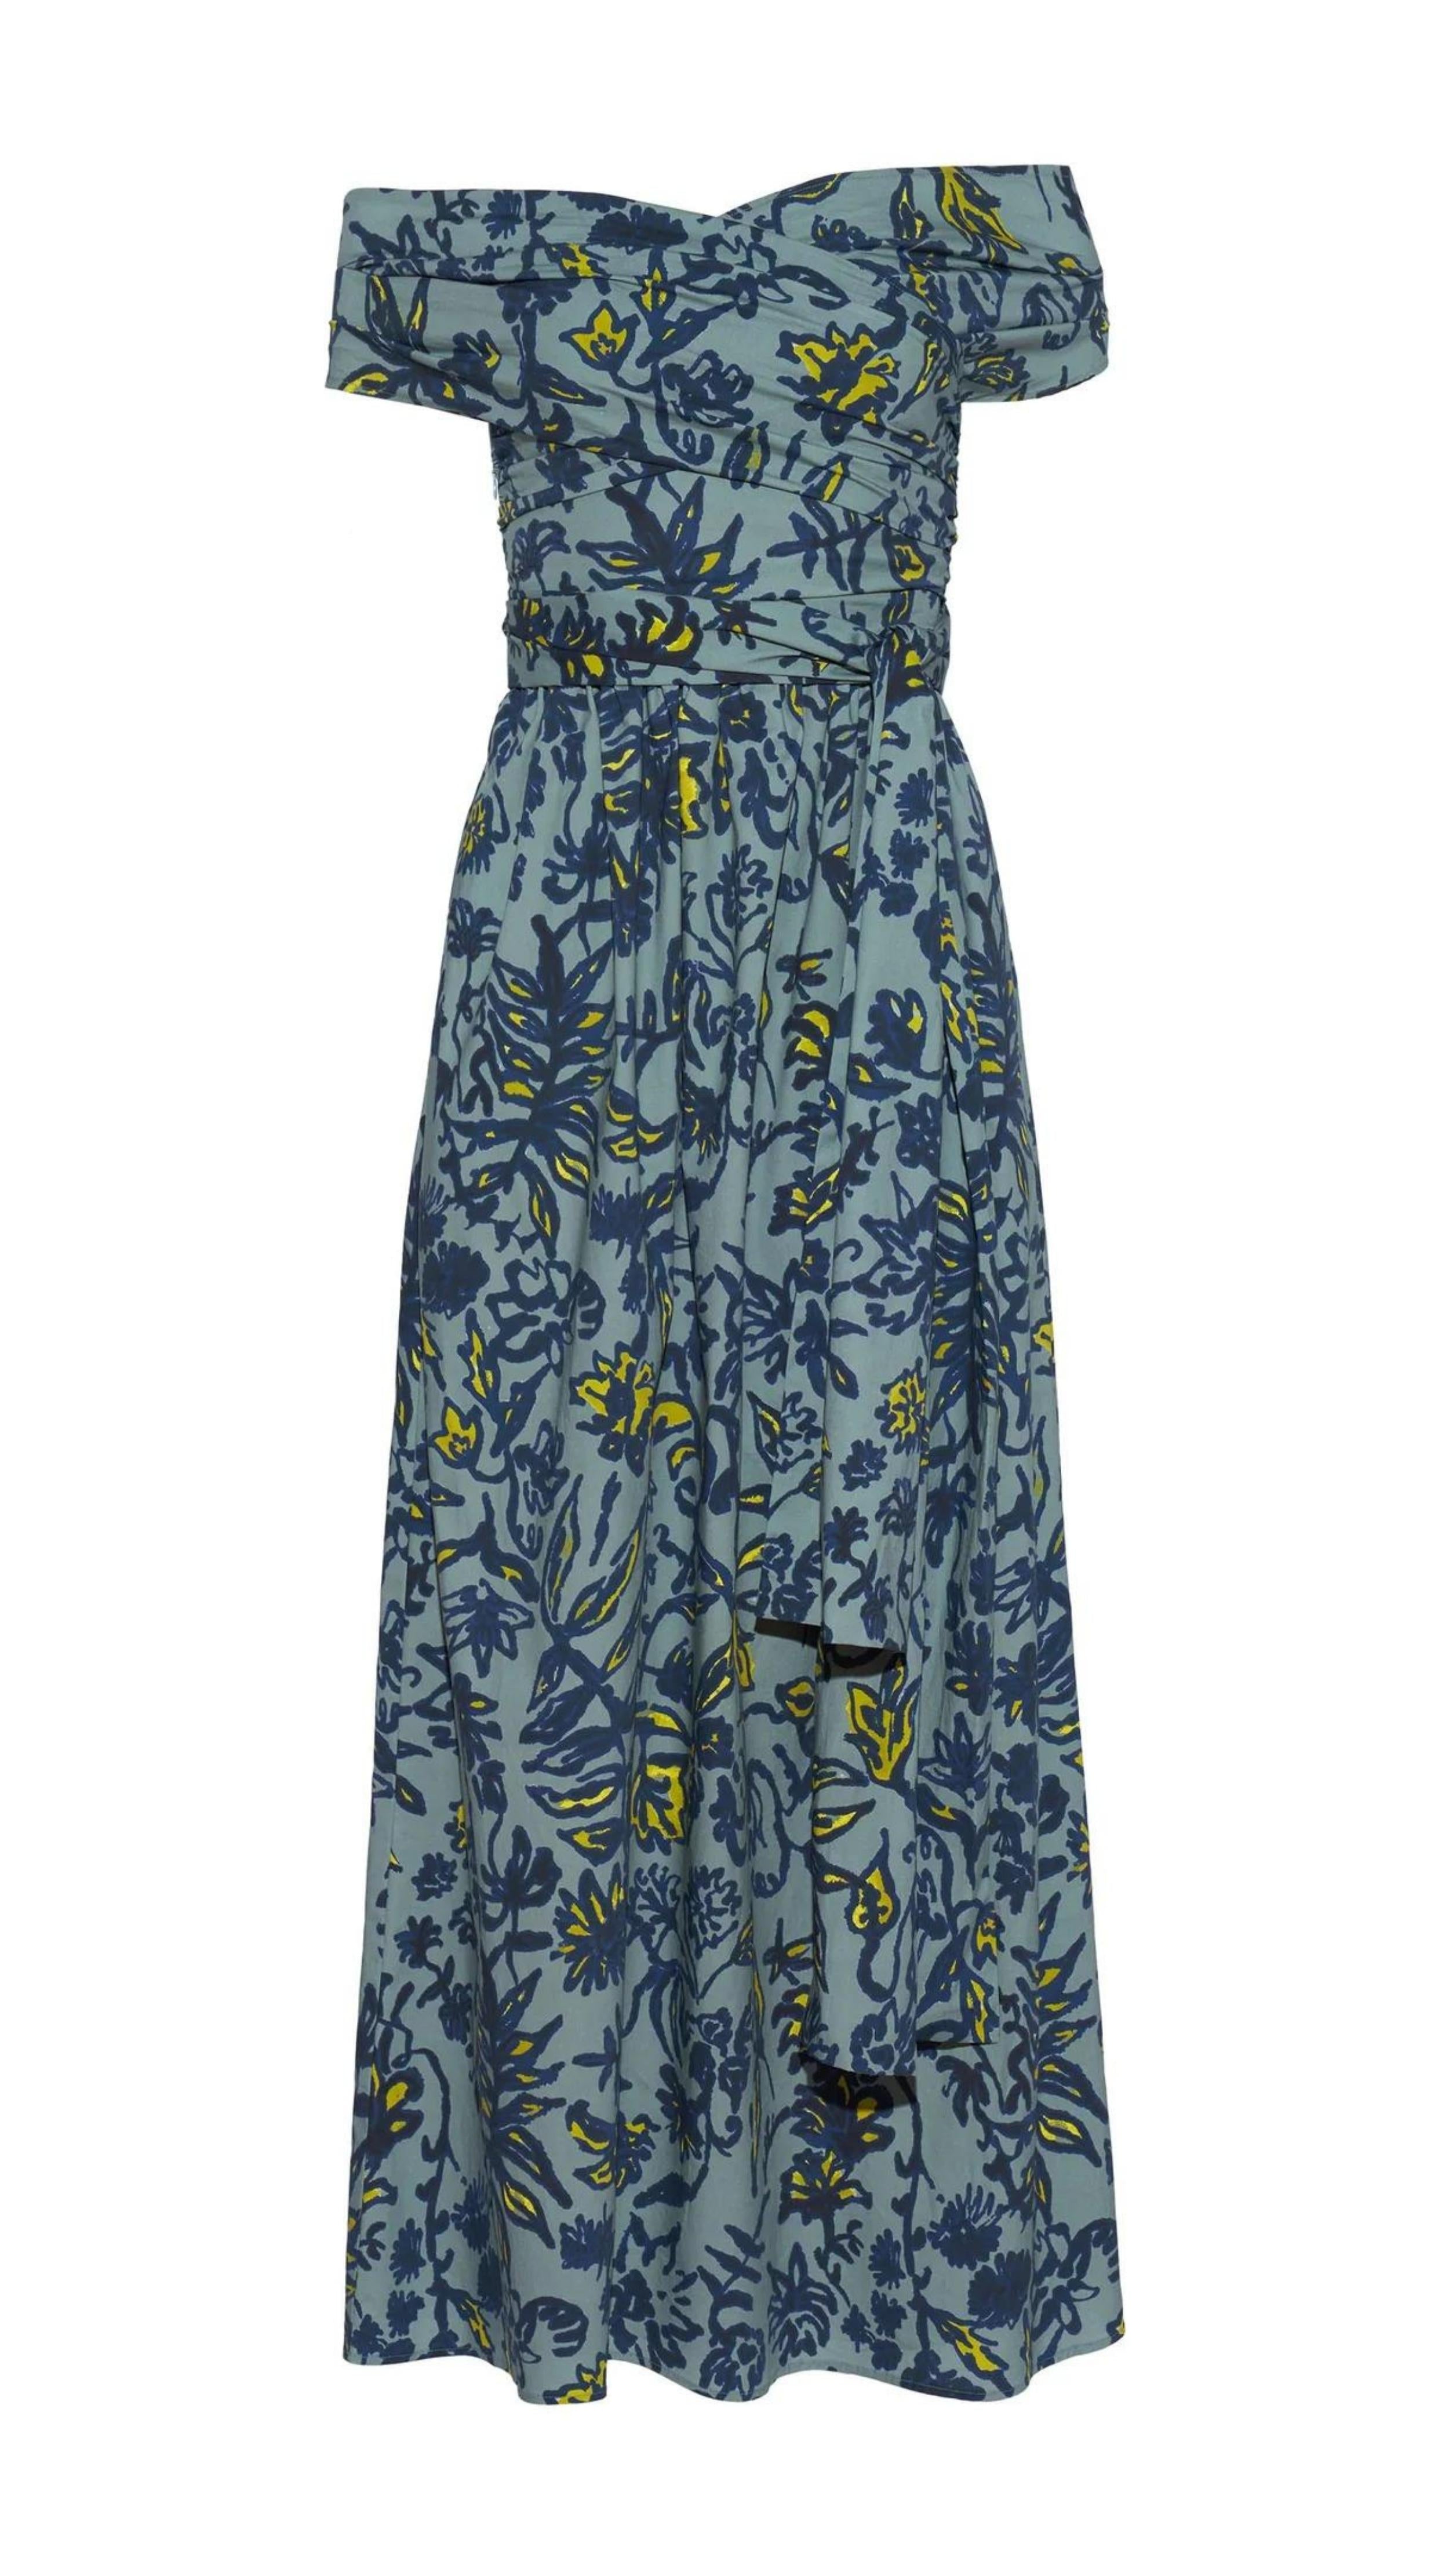 Altuzarra Corfu Dress in Stormcloud Shibori Flower. Relaxed off the shoulder cotton dress in beautiful grey blue, dark blue and yellow floral pattern. Wrap around style top with wrap around belt flows into the straight midi length skirt. Shown facing front. Available at experience 27 in madrid spain.